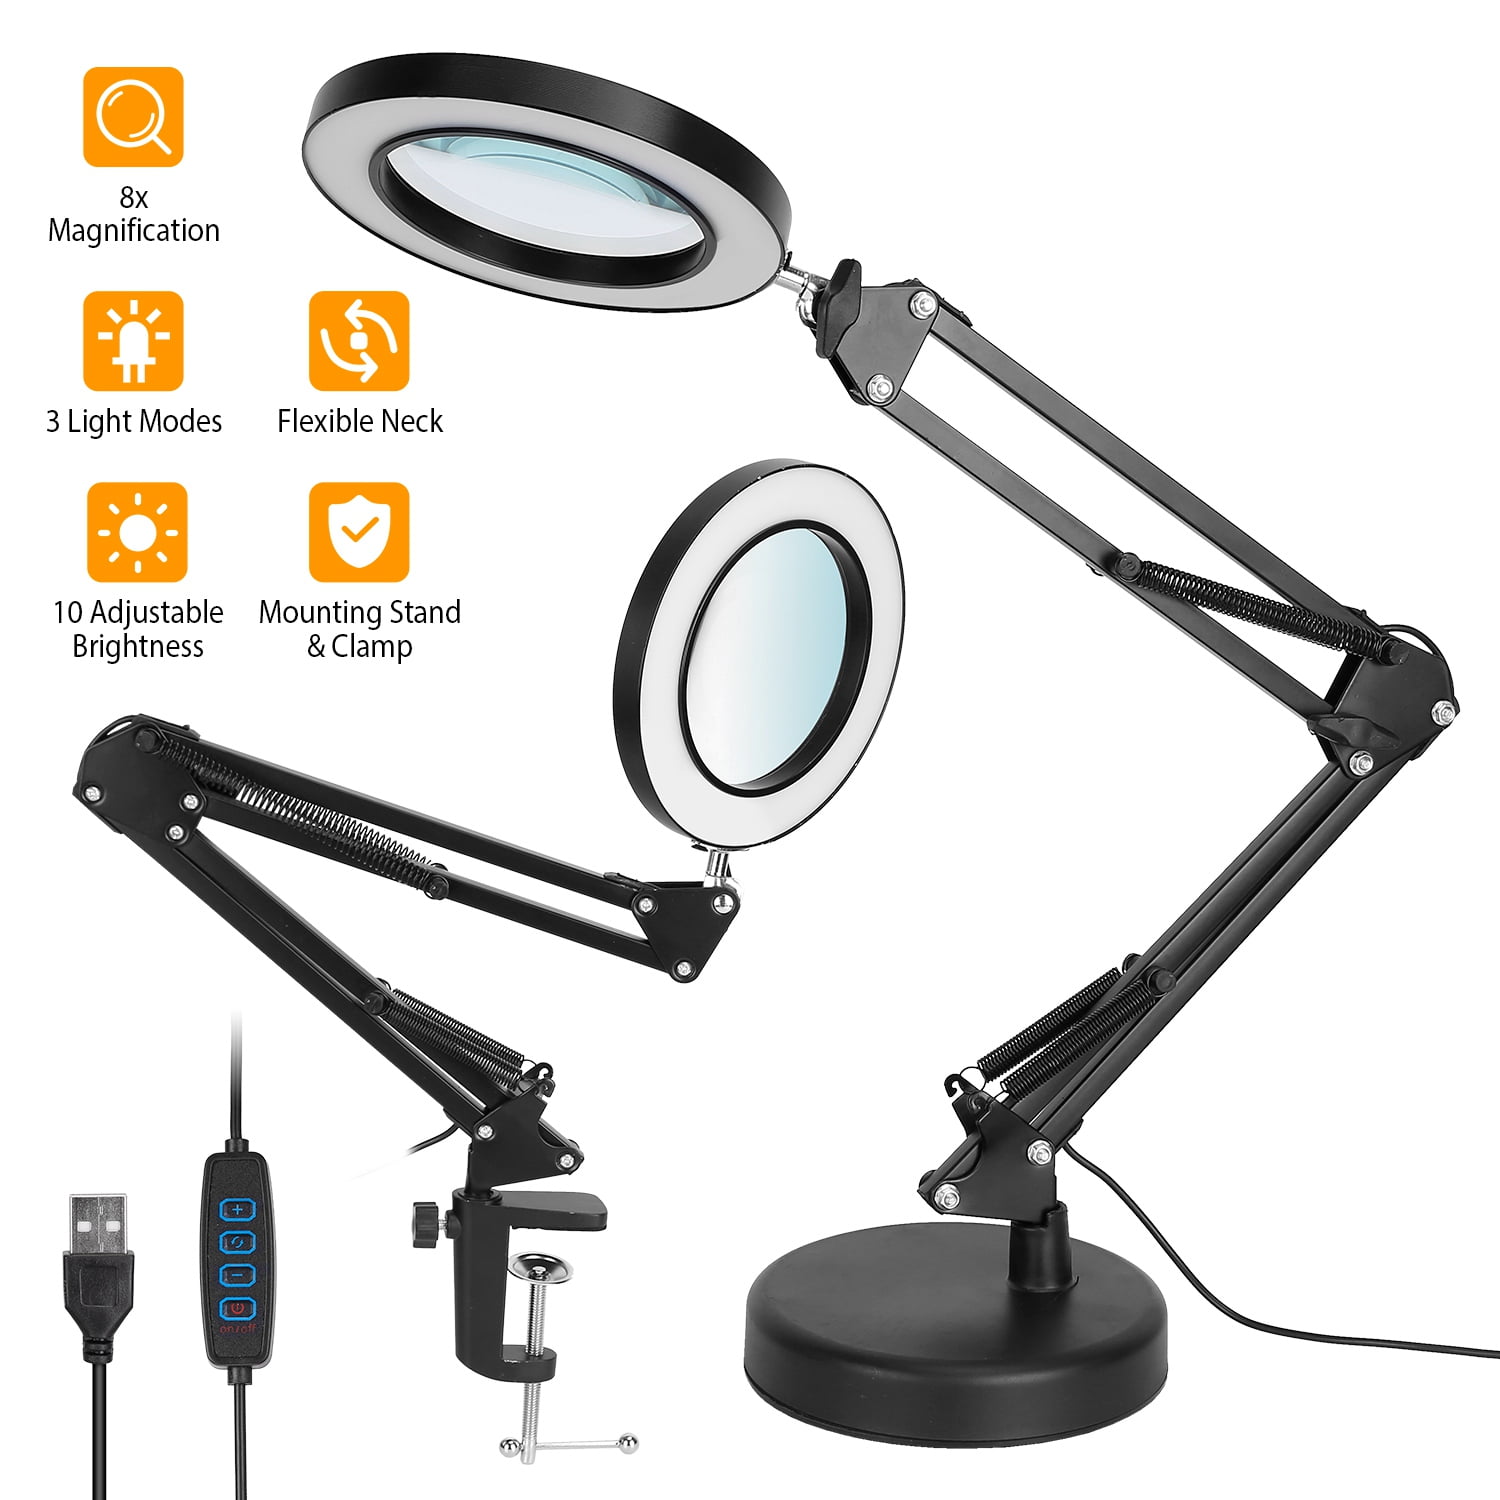 Magnifying Glass Lamp Dylviw 2x Magnifier Light with Metal Clamp Table Base Holder USB Powered Classic Black Portable Clip Desktop Magnifying Lamp